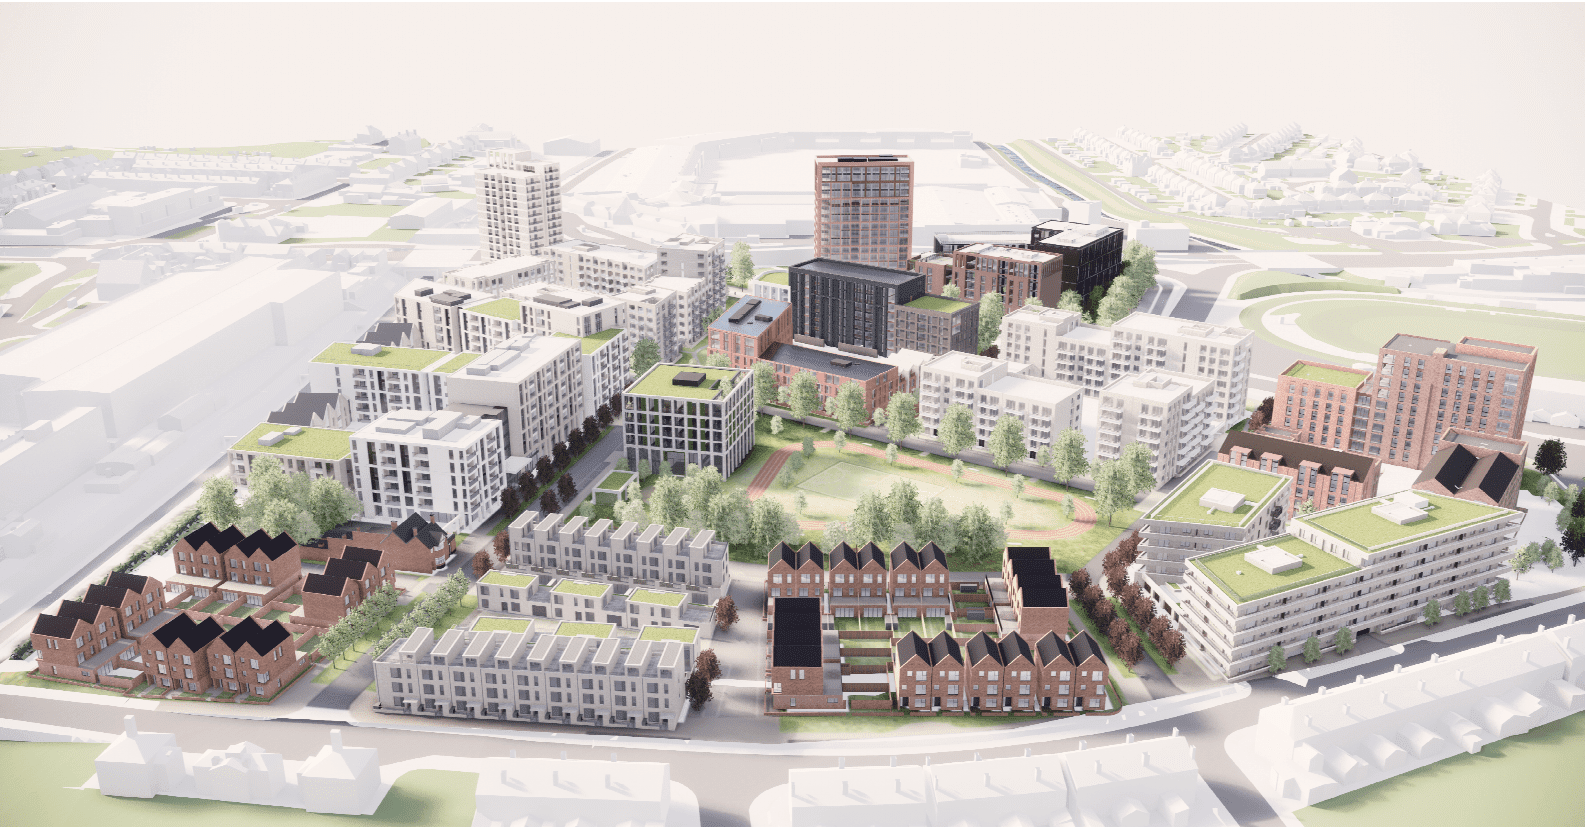 Birmingham City Council Perry Barr – Commonwealth Games Athletes’ Village and Legacy min